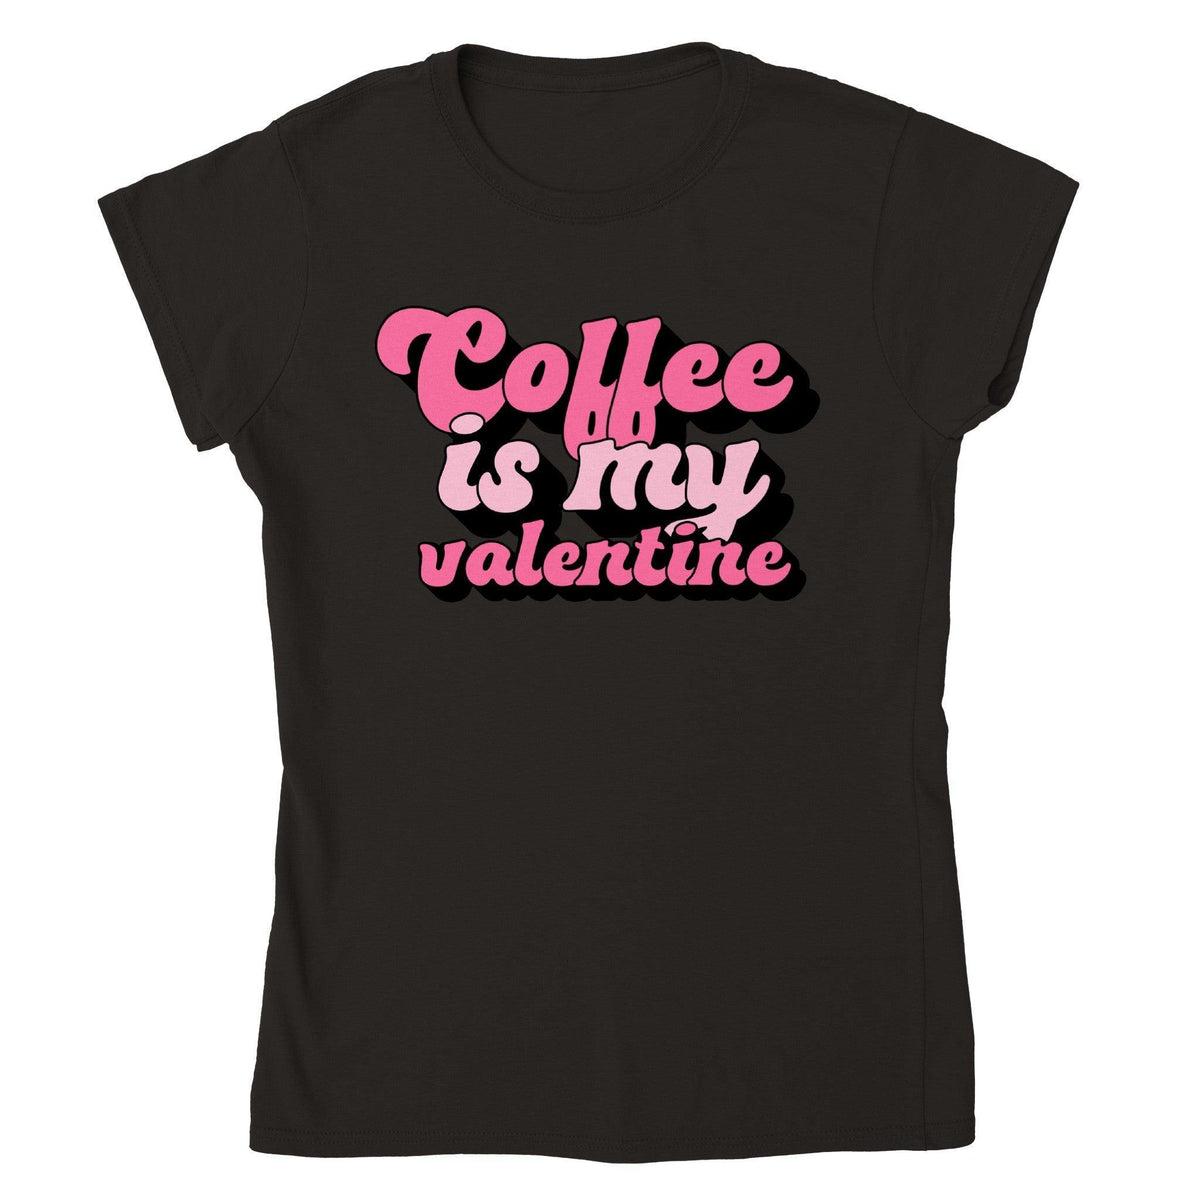 COFFEE IS MY VALENTINE (Text) T-shirt-Regular Fit Tee-StylinArts